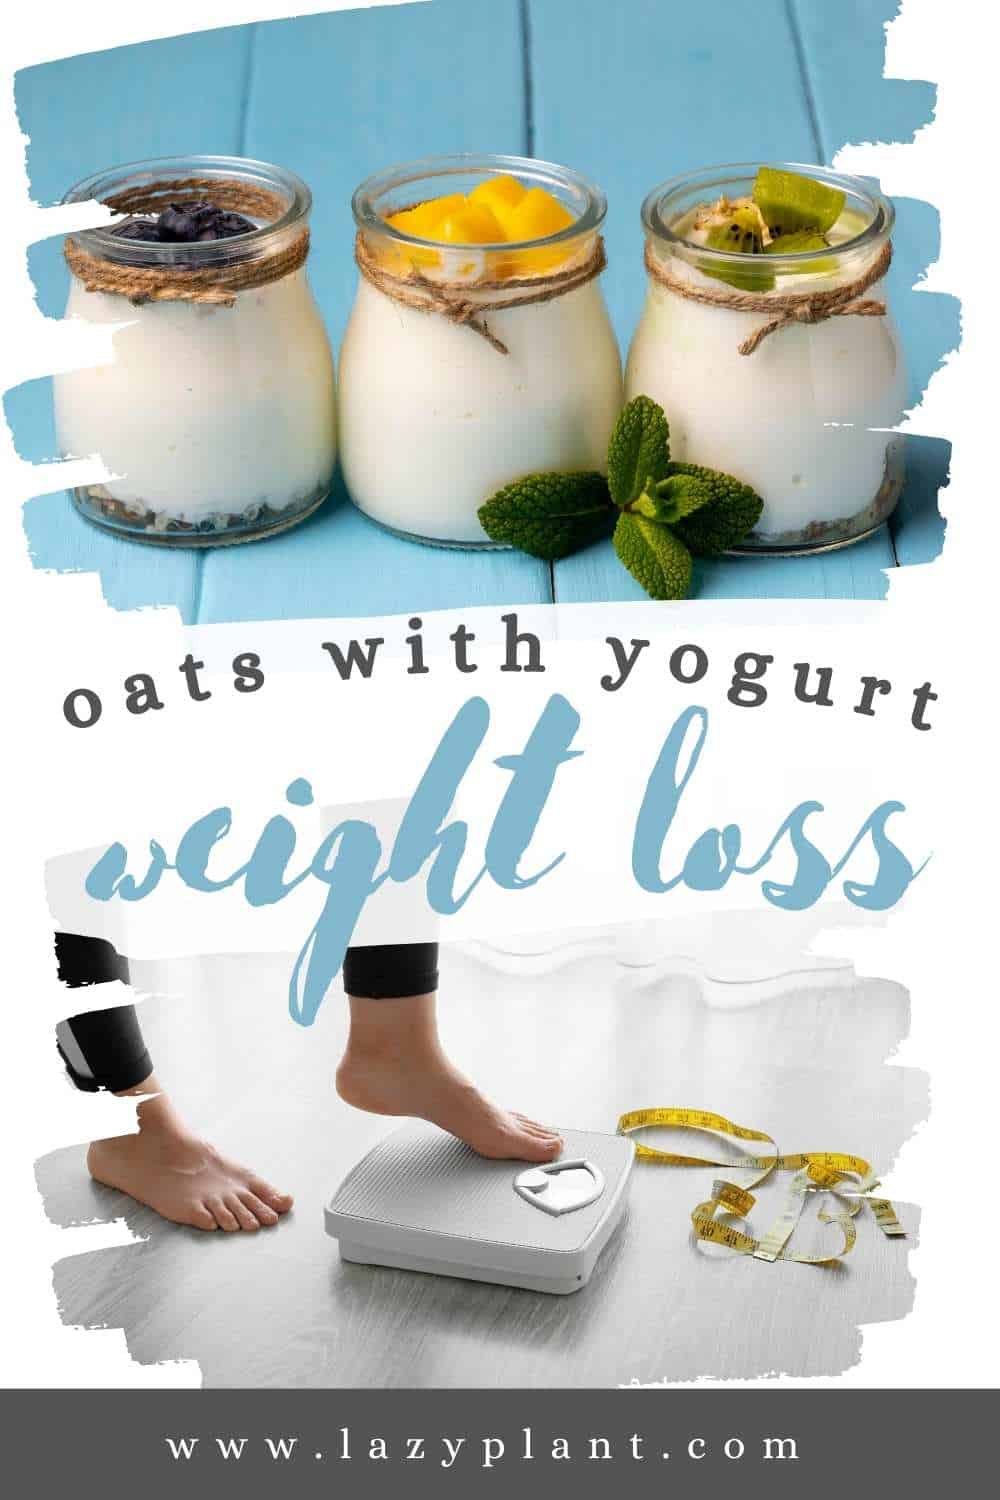 What’s the healthiest snack for weight loss? Overnight oats with Greek yogurt!